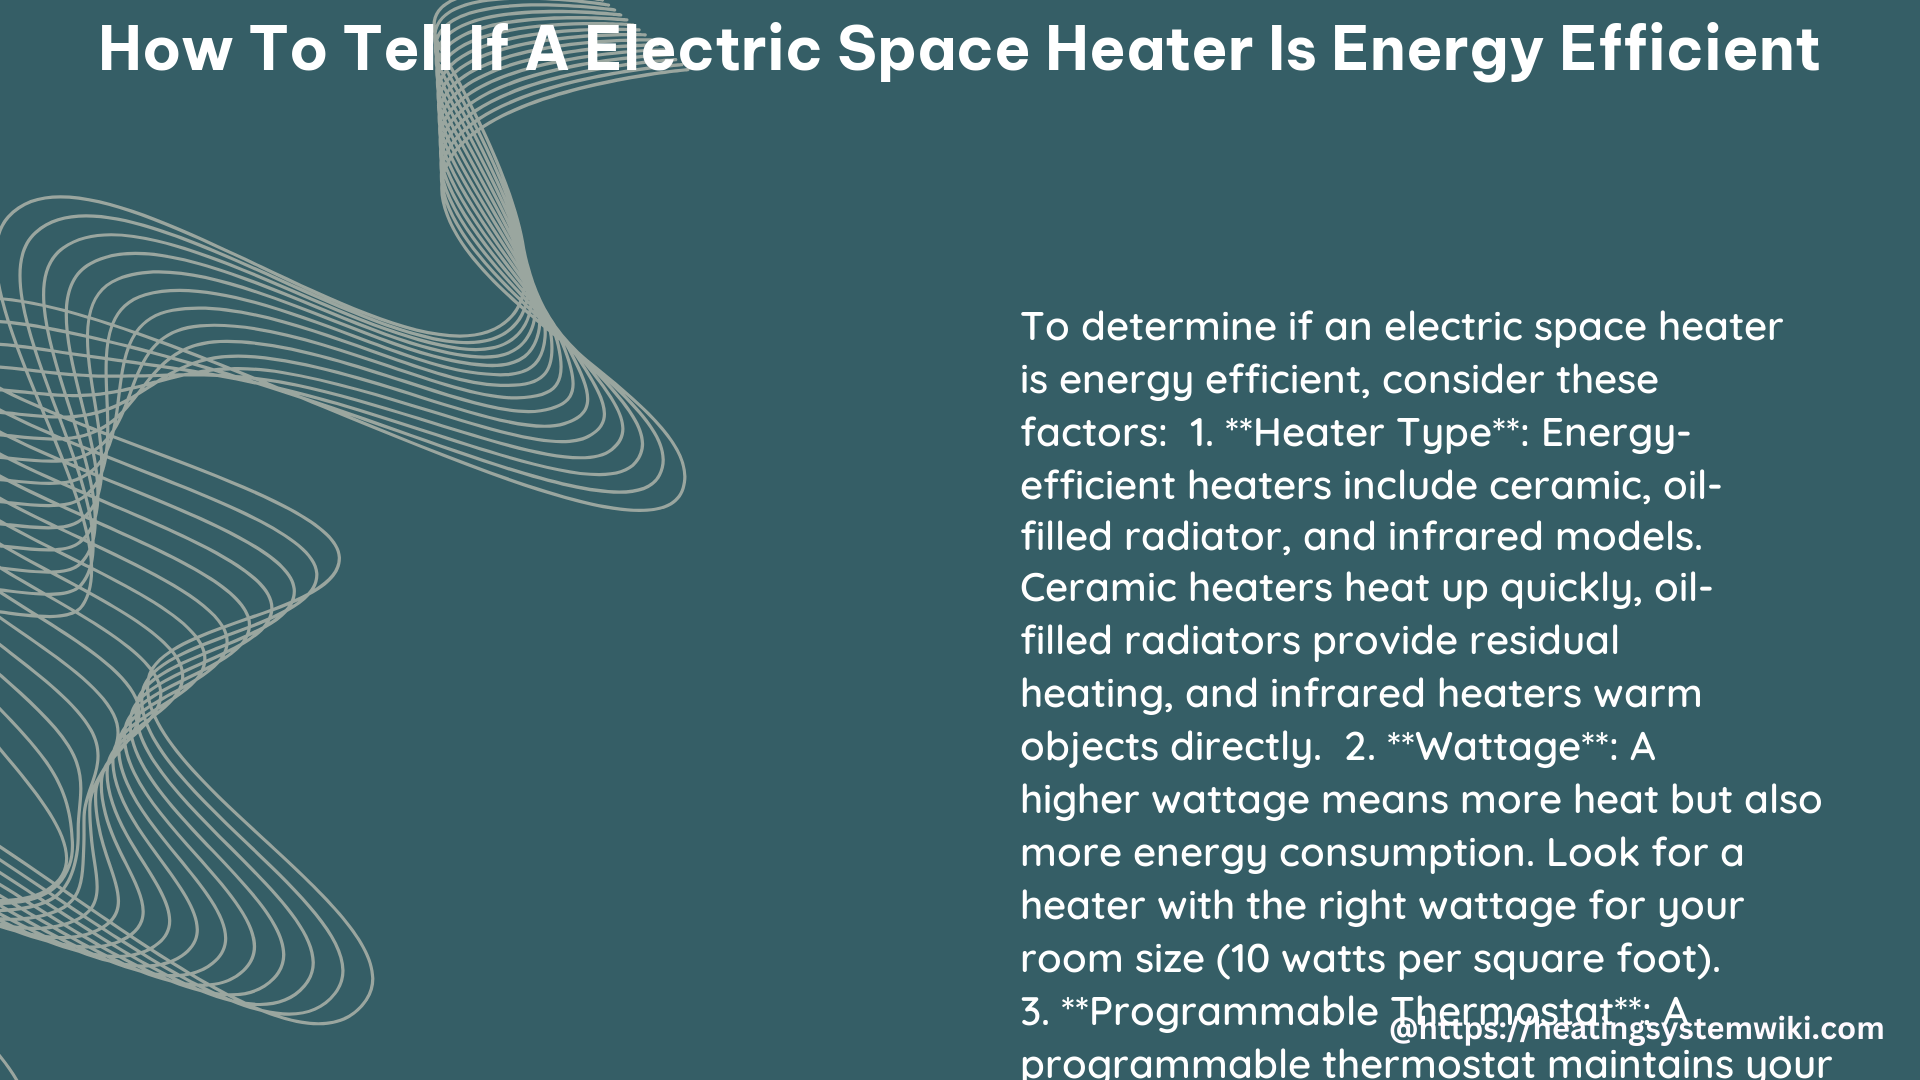 how to tell if a Electric Space Heater is energy efficient